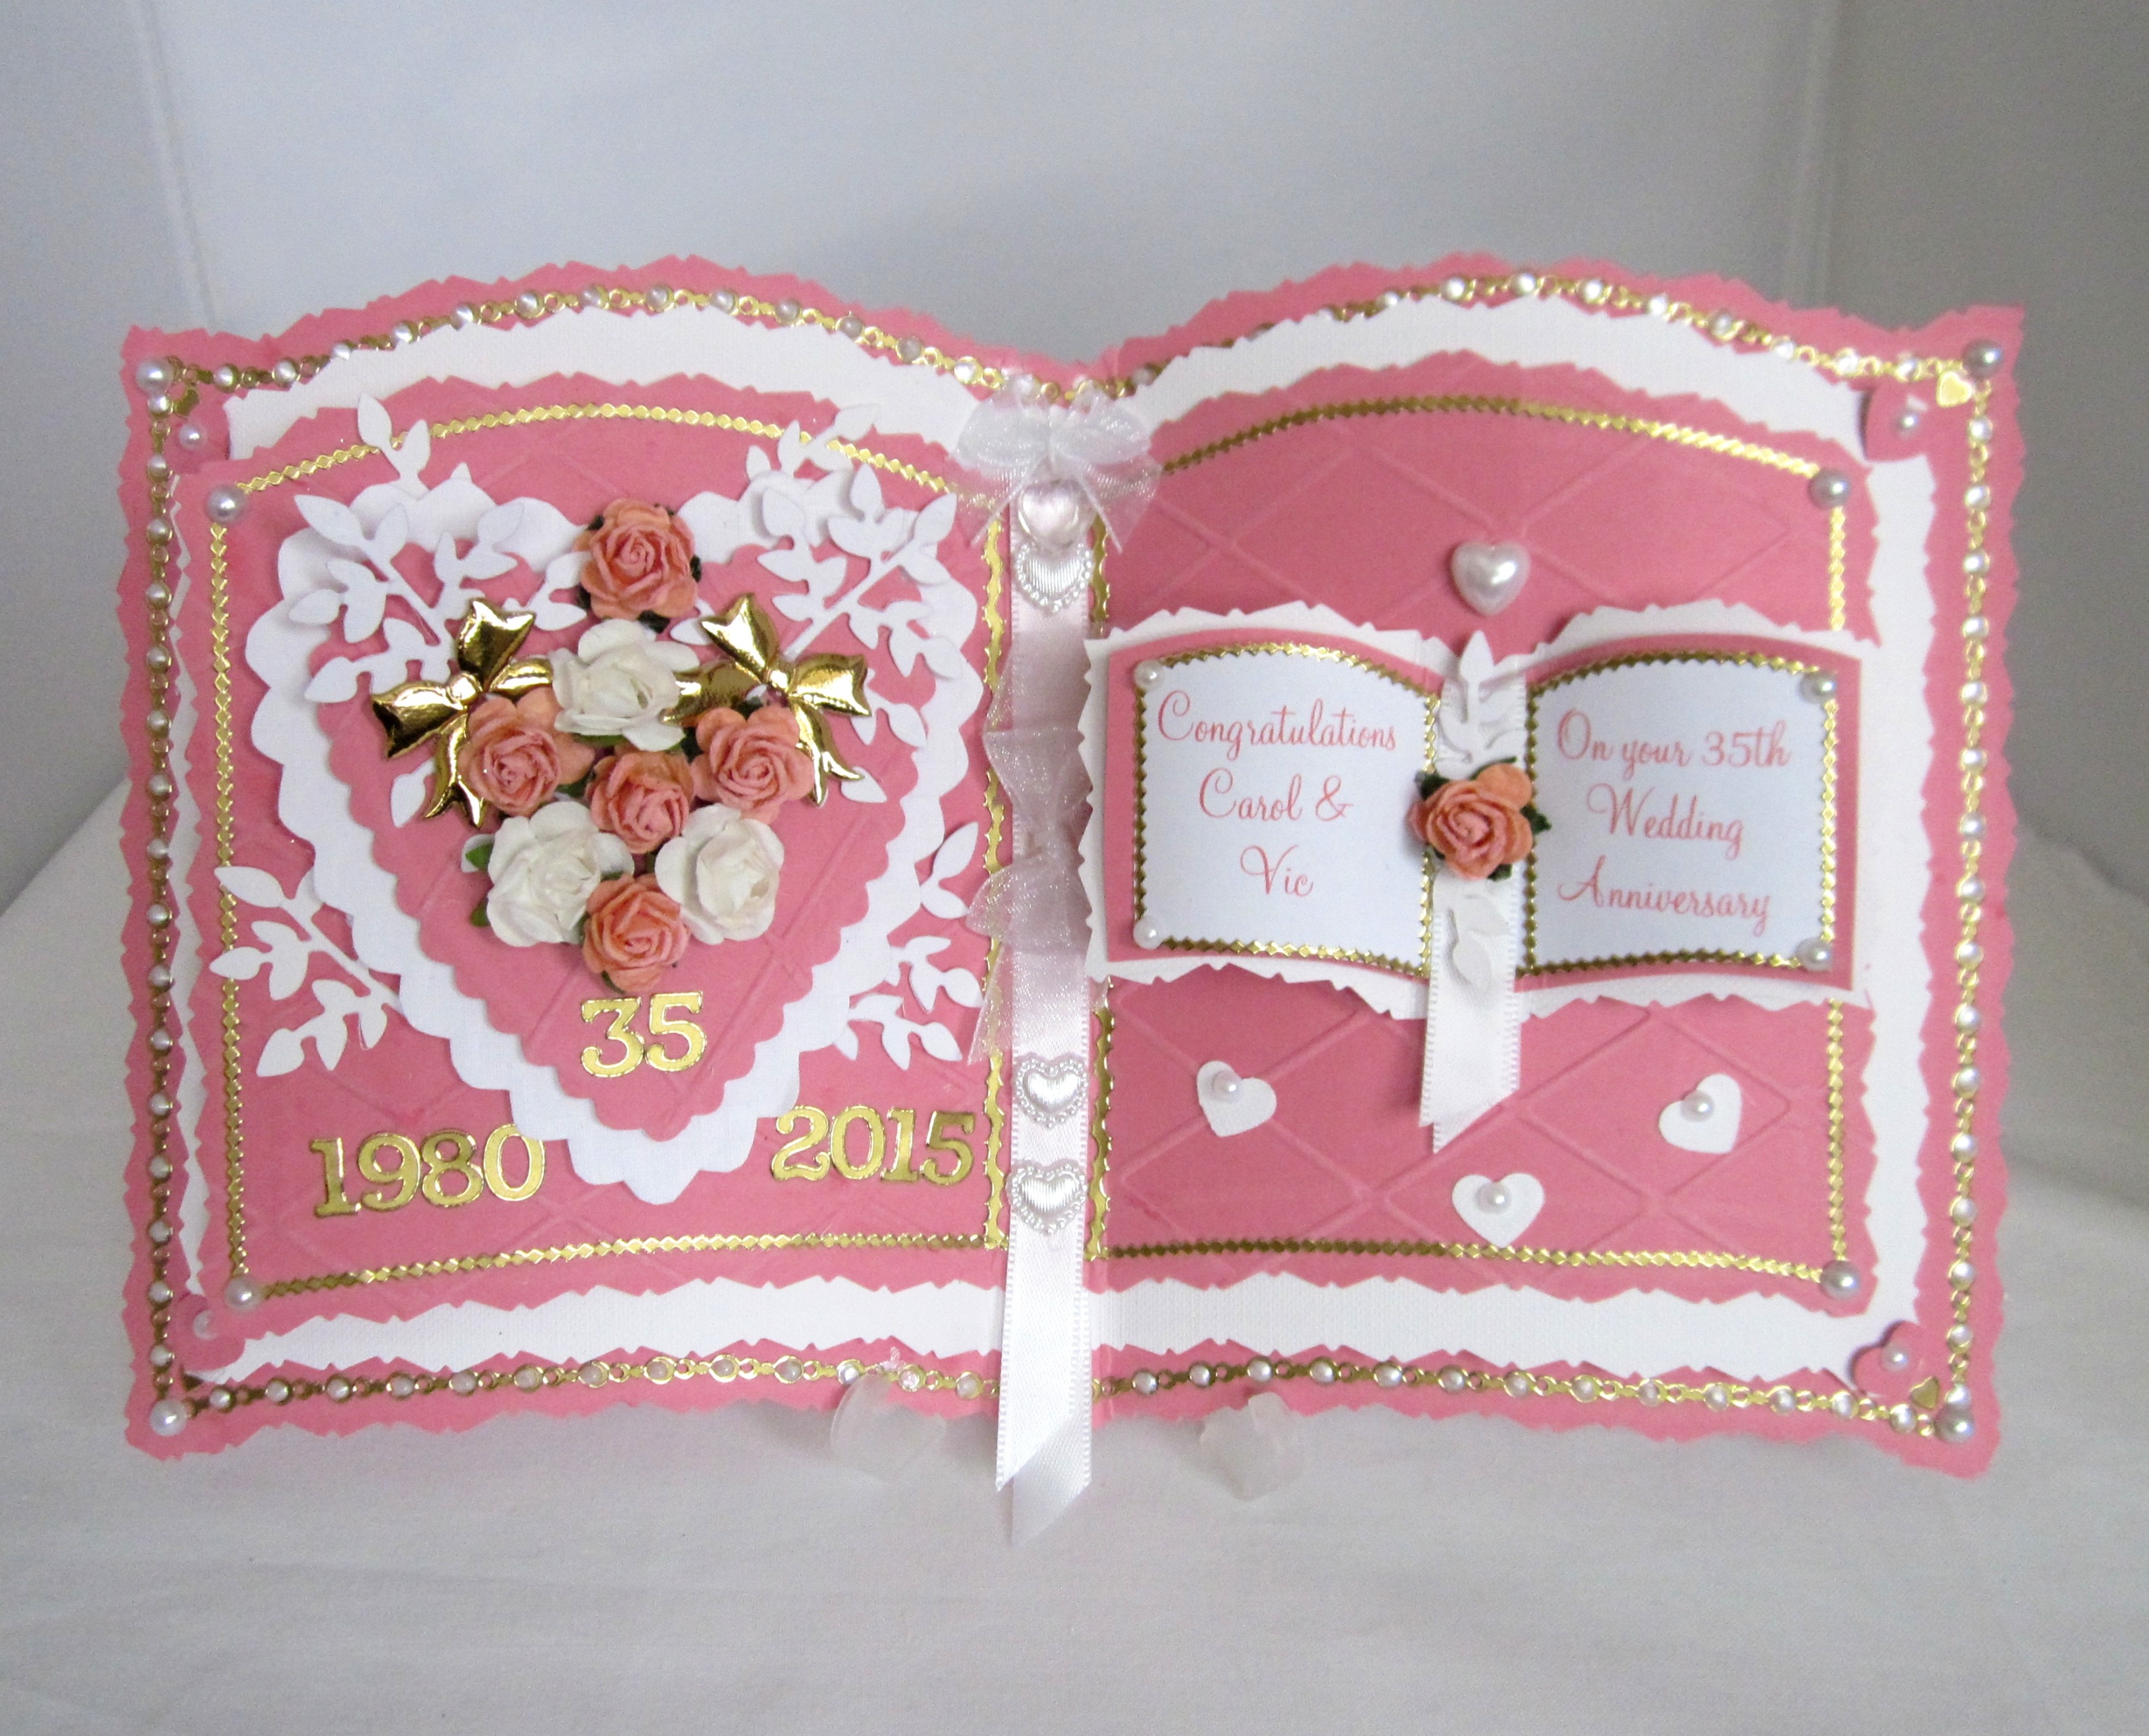  Coral  Wedding  Anniversary  card  with box and stand